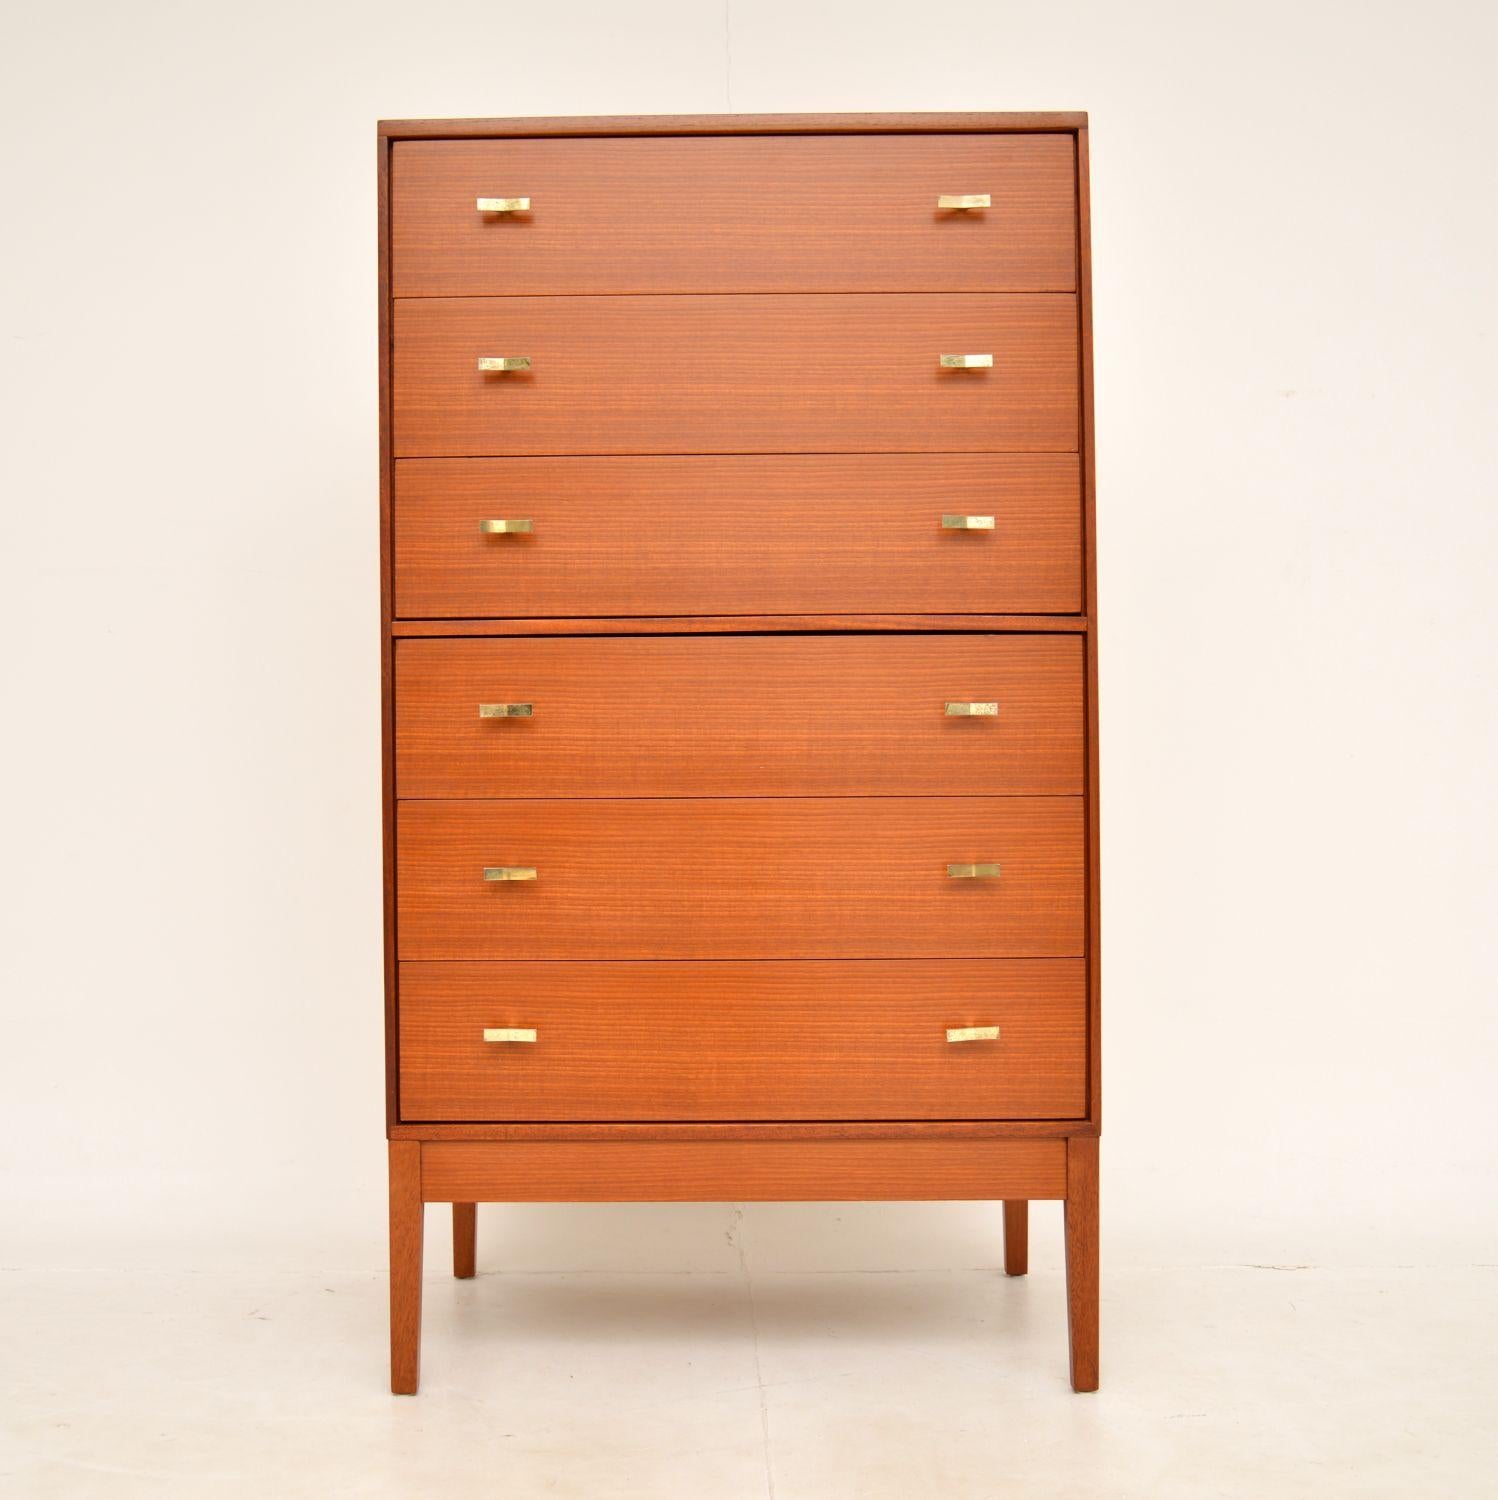 A beautiful and very well made vintage tallboy chest of drawers in teak and brass. This was made in England by Golden Key, it dates from the 1960’s.

The quality is excellent and this is a practical size as well as being very stylish. It is tall